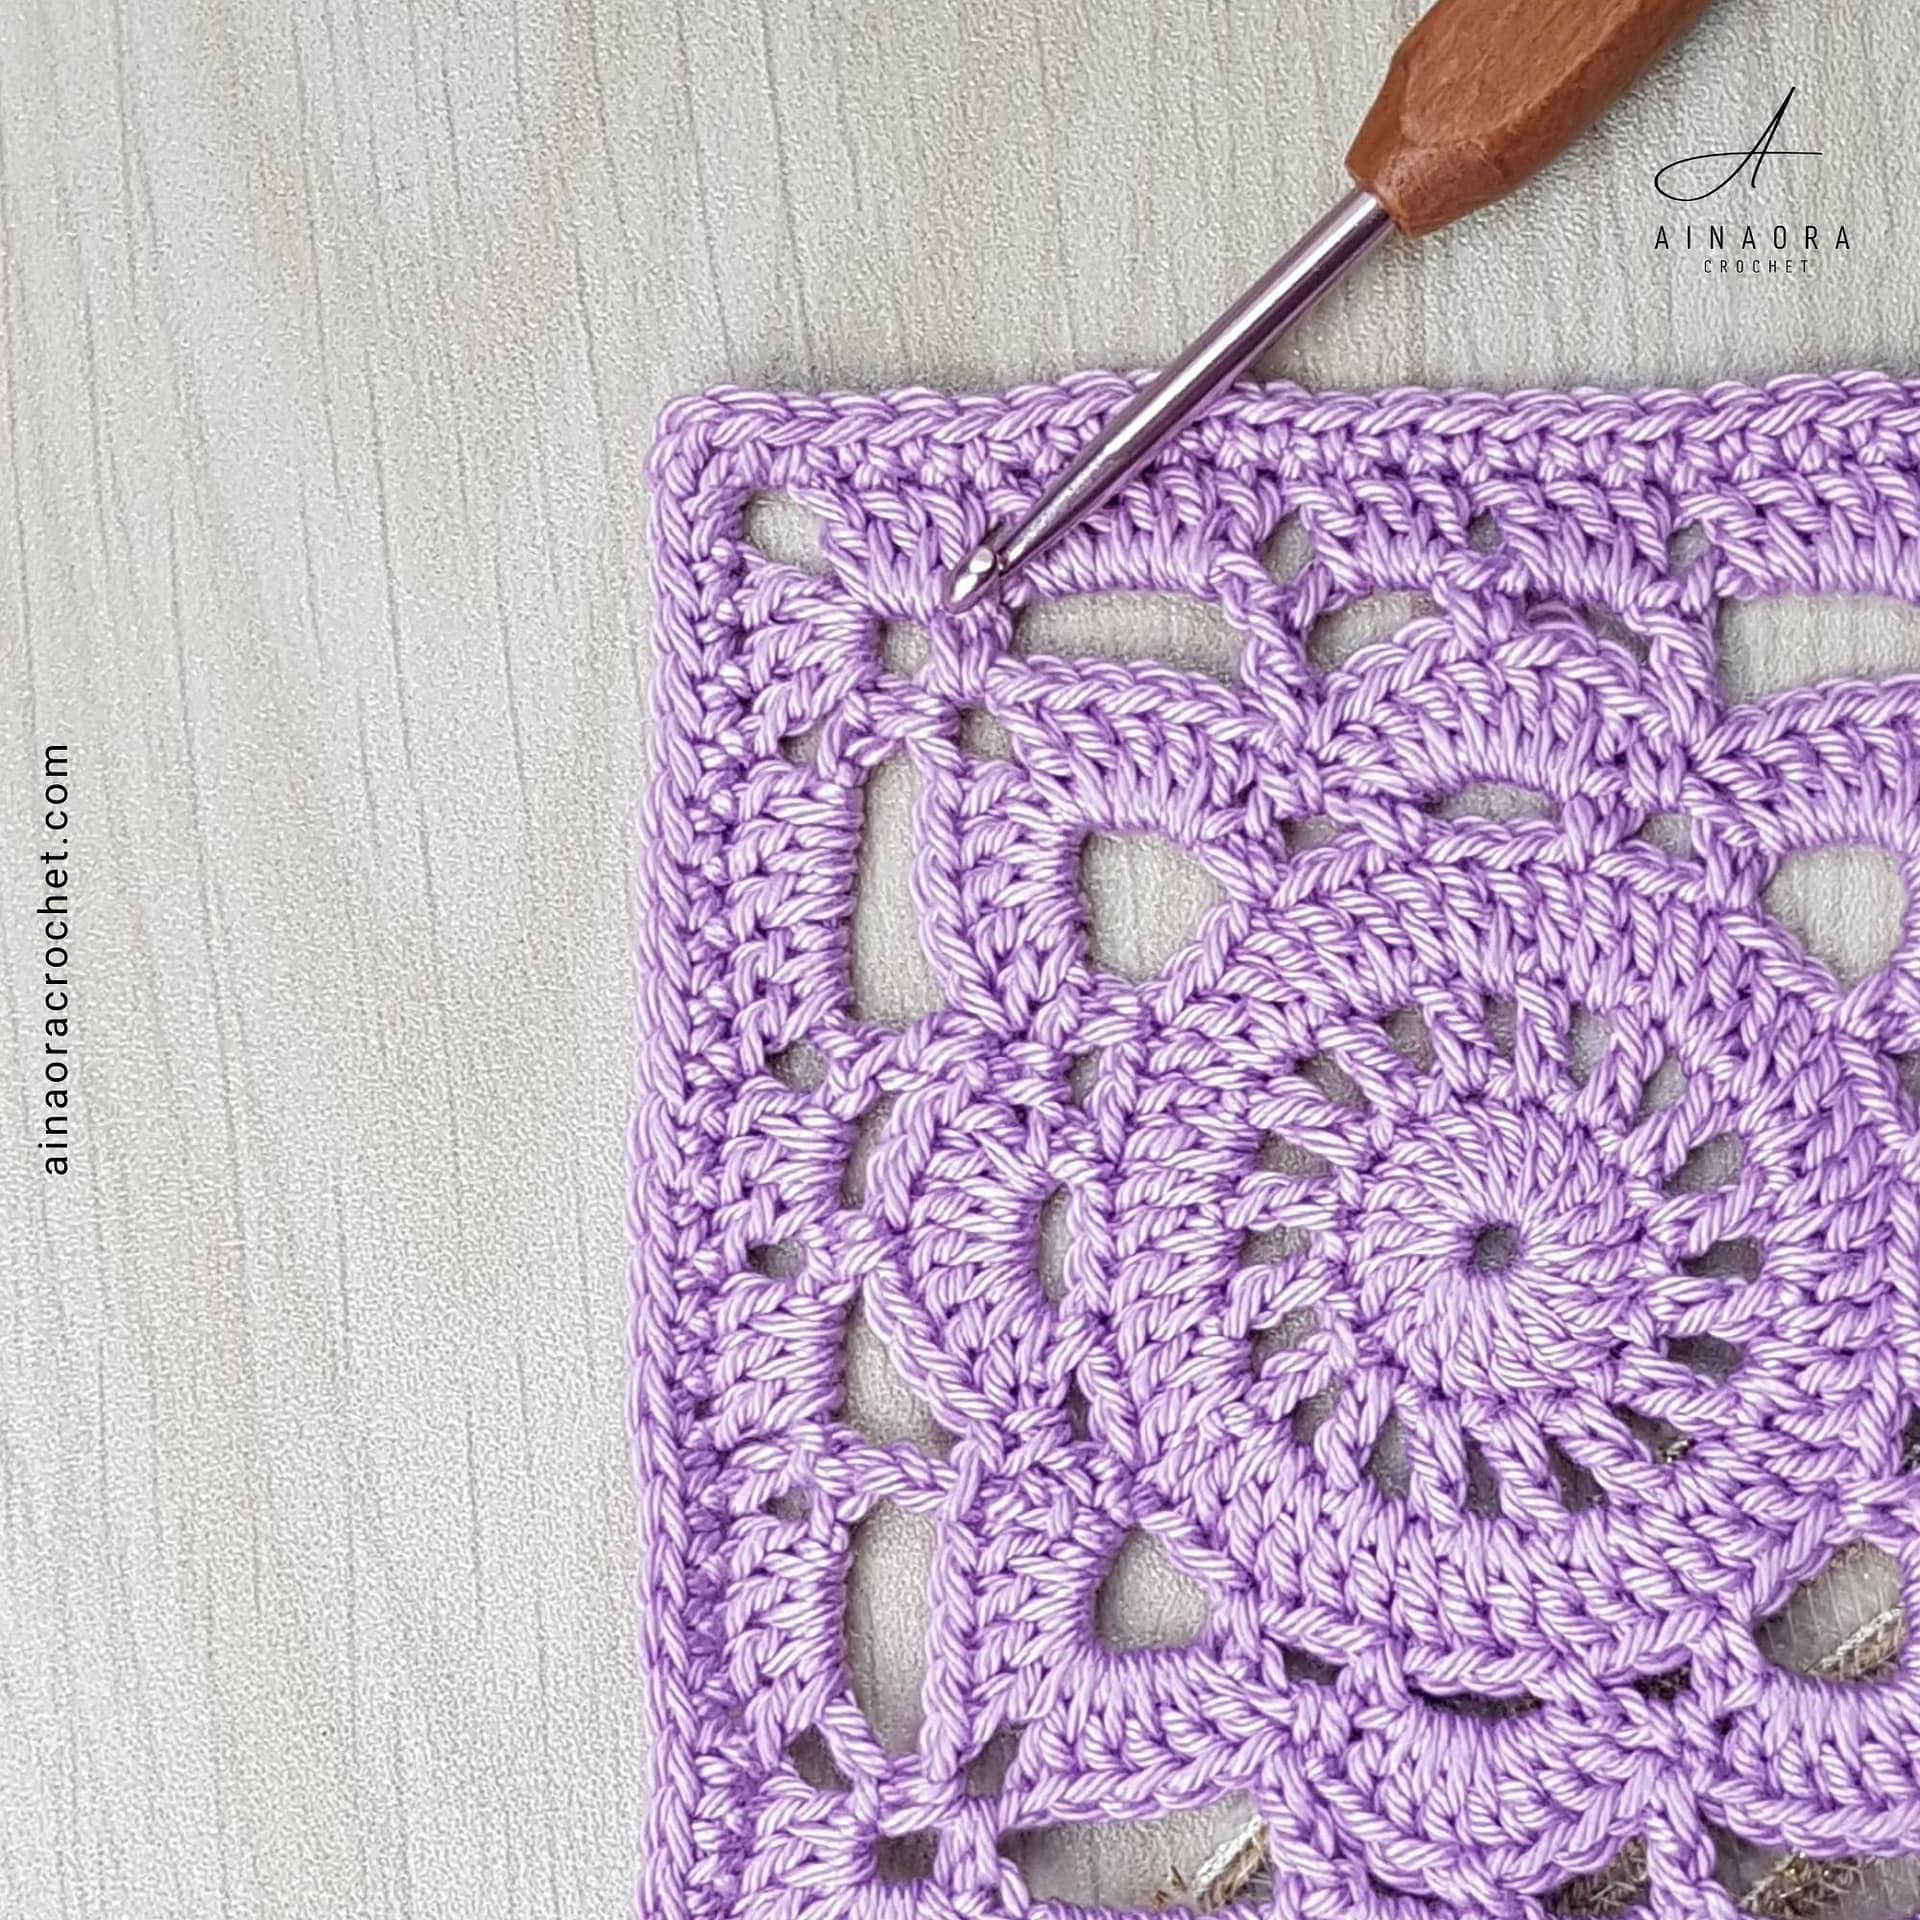 10 Granny Square Crochet Patterns To Inspire You - Willow Crochet